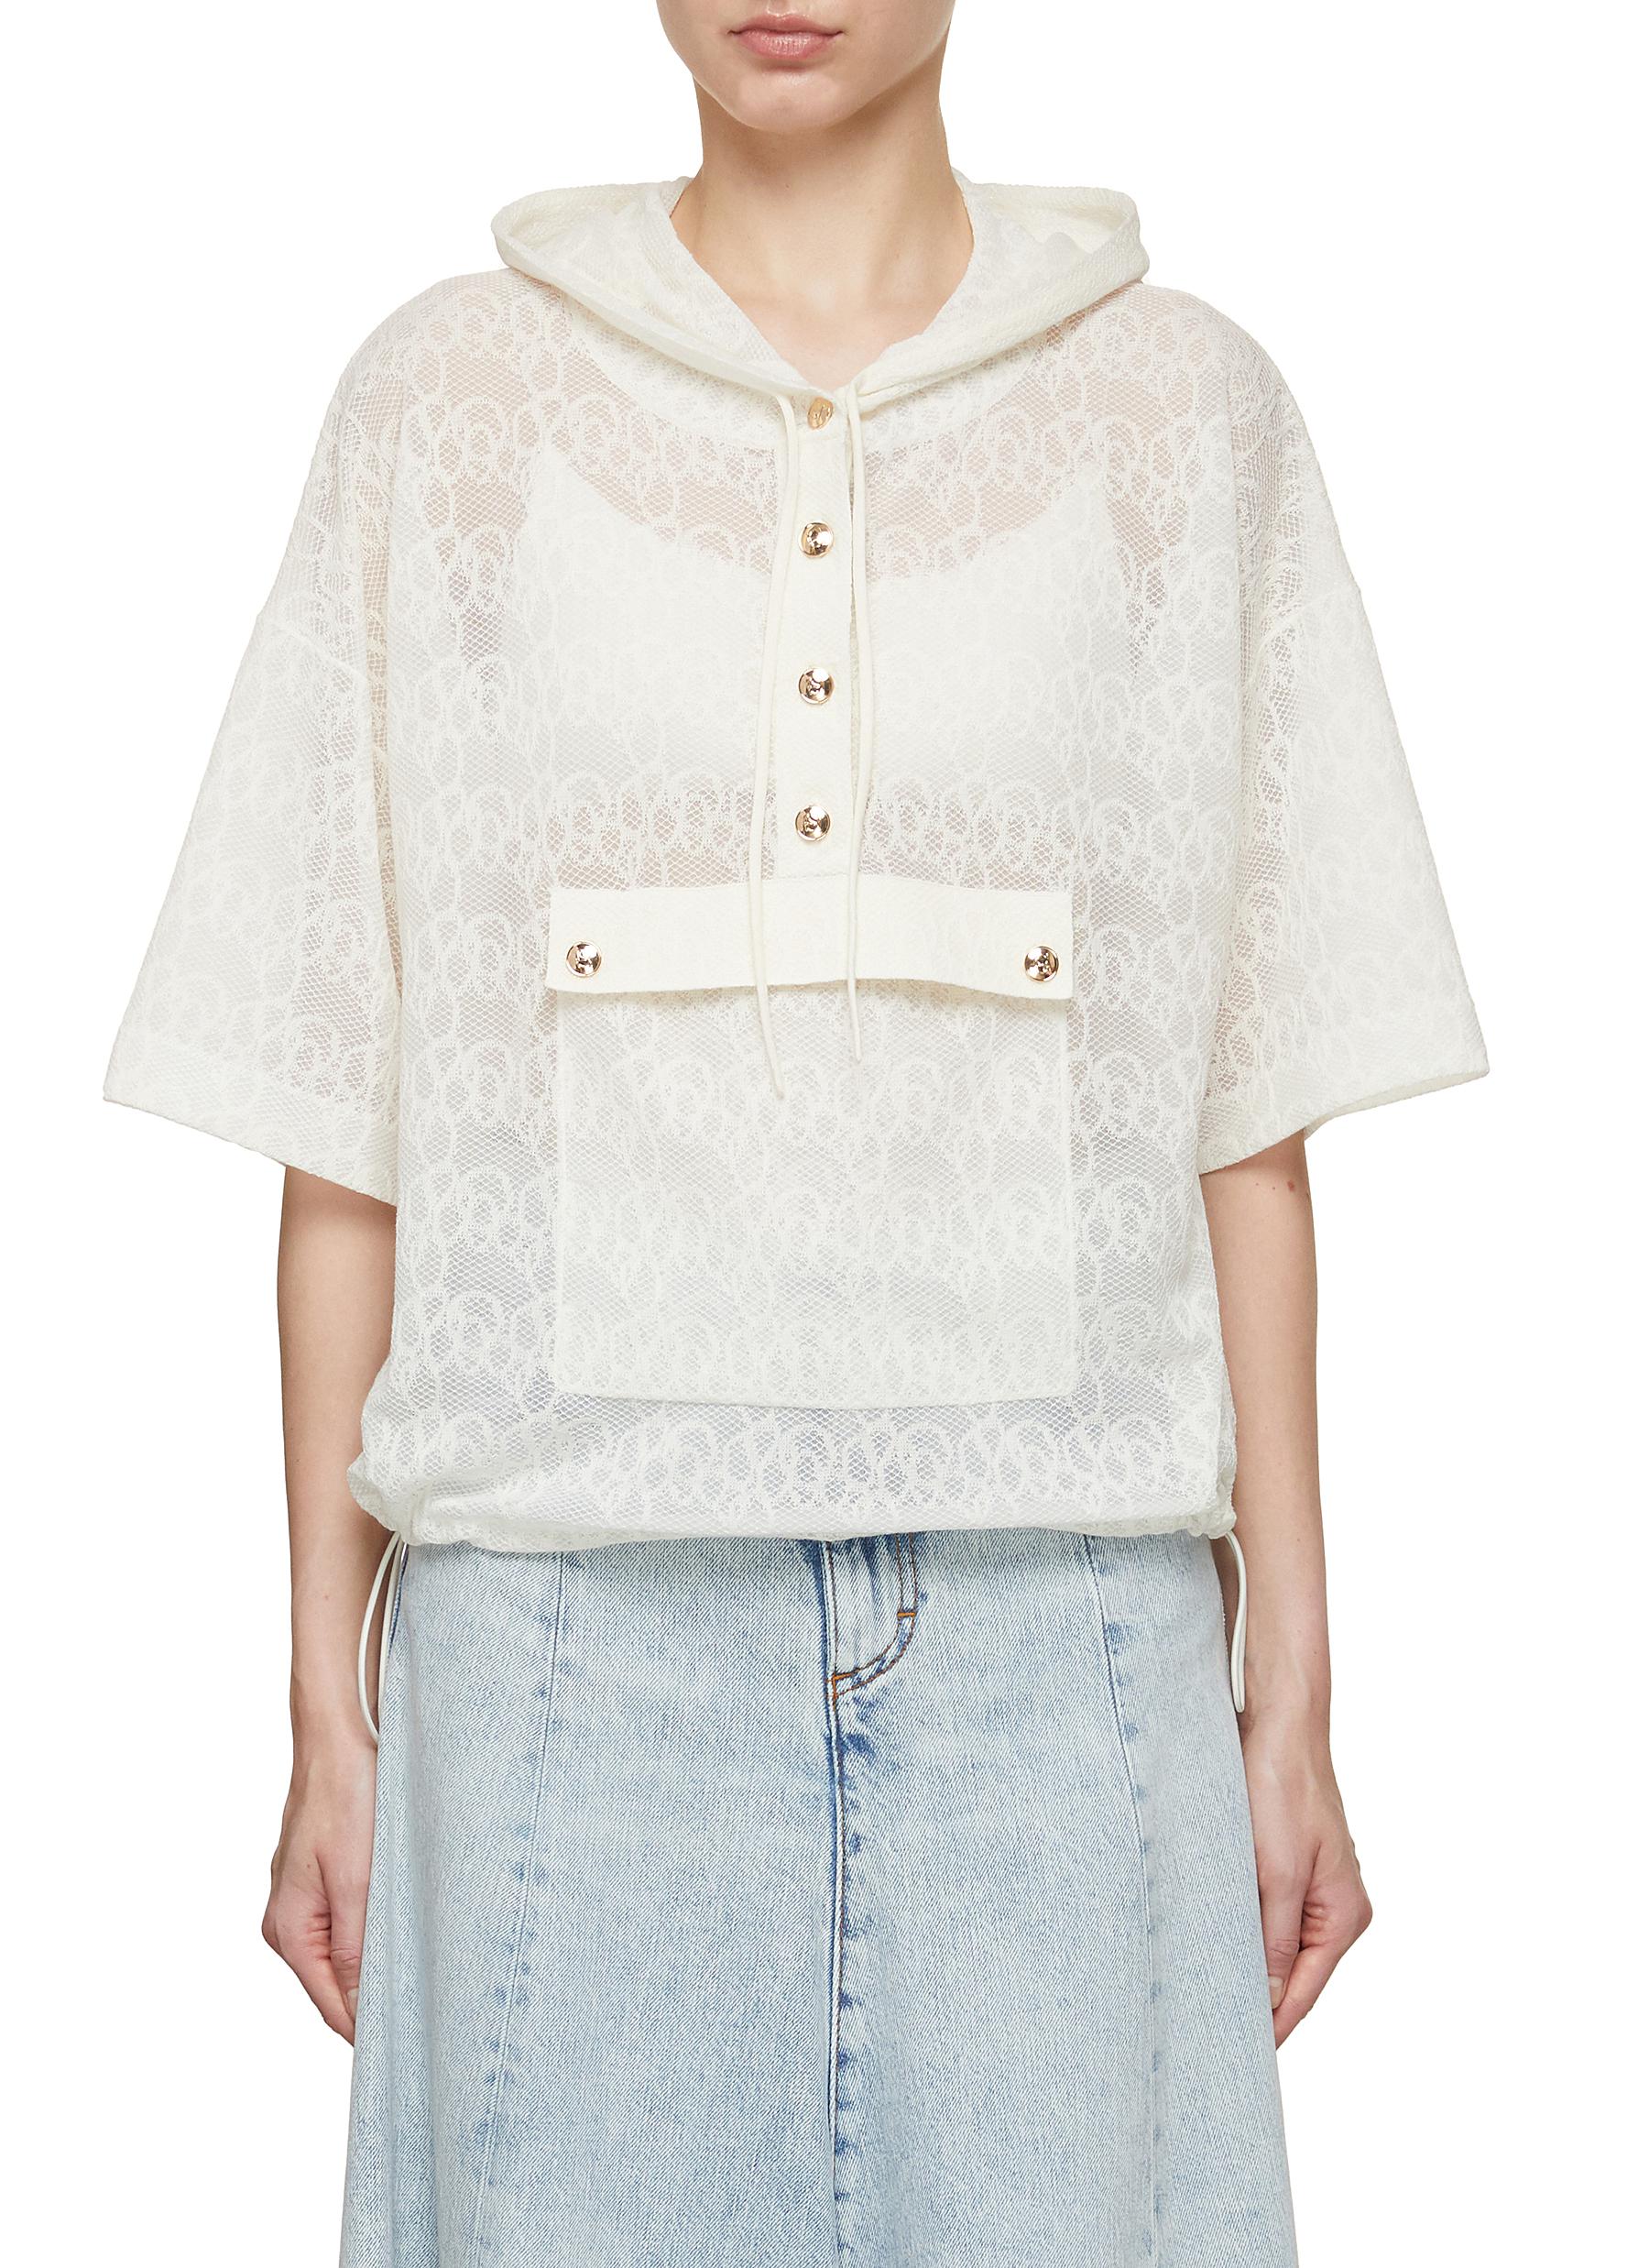 Lace Hooded Short Sleeved Top